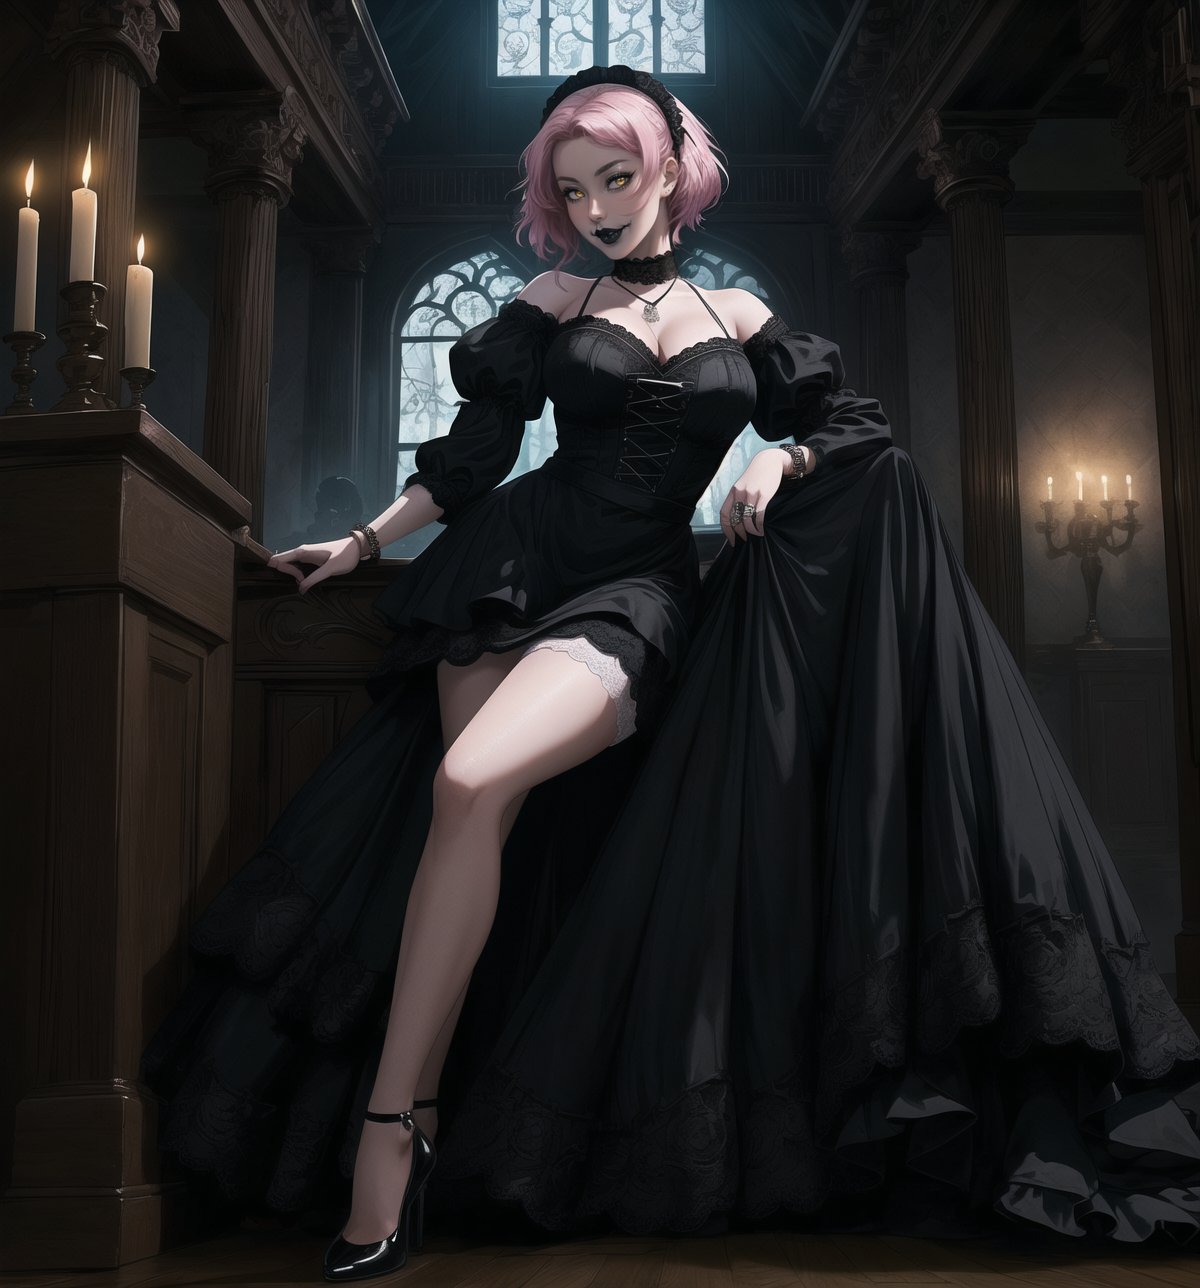 A gothic-lolita style masterpiece with realistic details, rendered in ultra-high resolution. | A young 22-year-old woman with pink hair and yellow eyes wears an elegant and provocative maid outfit. The black dress with white lace and the white apron with lace details highlight her sensual curves. She also wears black stockings and black low-heeled shoes, as well as accessories such as a pink heart pendant and a black leather bracelet. ((The young woman smiles at the viewer, showing her white teeth and wearing black lipstick)), creating a charming contrast to her sweet and innocent appearance. | The scene takes place in a macabre house, poorly lit by candles scattered throughout the room. The wooden structures, cobwebs hanging from the walls, and skulls and bones scattered across the floor create a spooky and mysterious atmosphere. The young woman stands out amidst this dark backdrop, adding a layer of beauty and fascination to the image. | Soft, moody lighting effects create a gothic mood, while detailed textures on clothing, accessories and set elements add realism to the masterpiece. | An intriguing and compelling scene of a young gothic-lolita woman in a macabre house, exploring themes of contrast, beauty and mystery. | (((((The image reveals a full-body shot as she assumes a sensual pose, engagingly leaning against a structure within the scene in an exciting manner. She takes on a sensual pose as she interacts, boldly leaning on a structure, leaning back in an exciting way.))))). | ((full-body shot)), ((perfect pose)), ((perfect fingers, better hands, perfect hands)), ((perfect legs, perfect feet)), ((huge breasts)), ((perfect design)), ((perfect composition)), ((very detailed scene, very detailed background, perfect layout, correct imperfections)), More Detail, Enhance